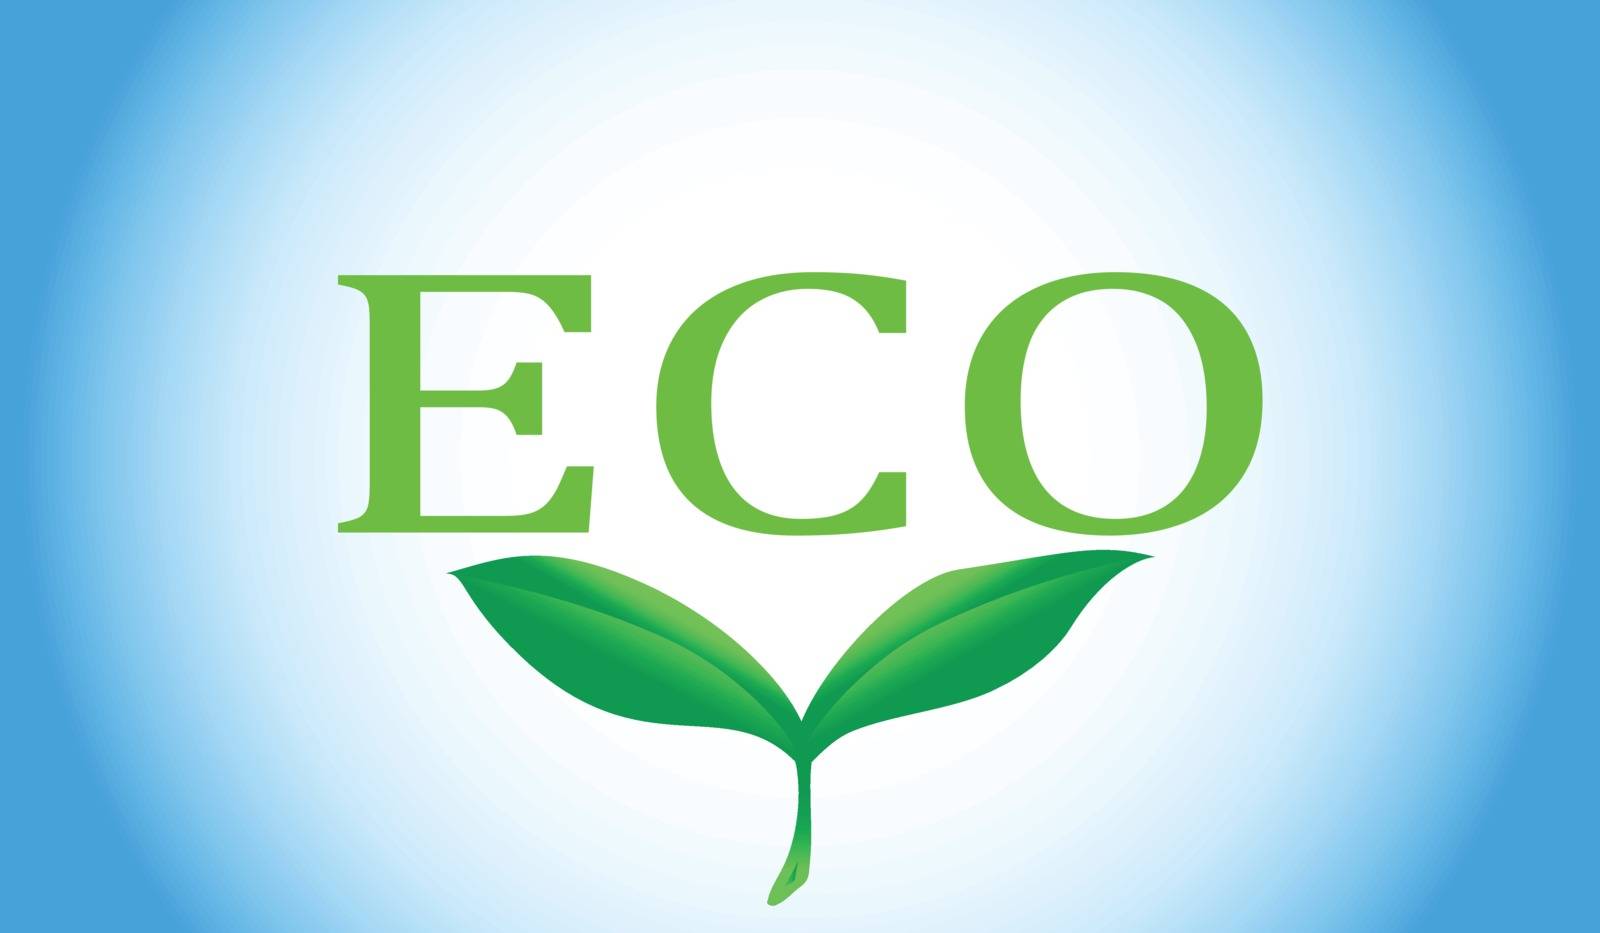 Eco word with green leaves on white and blue background